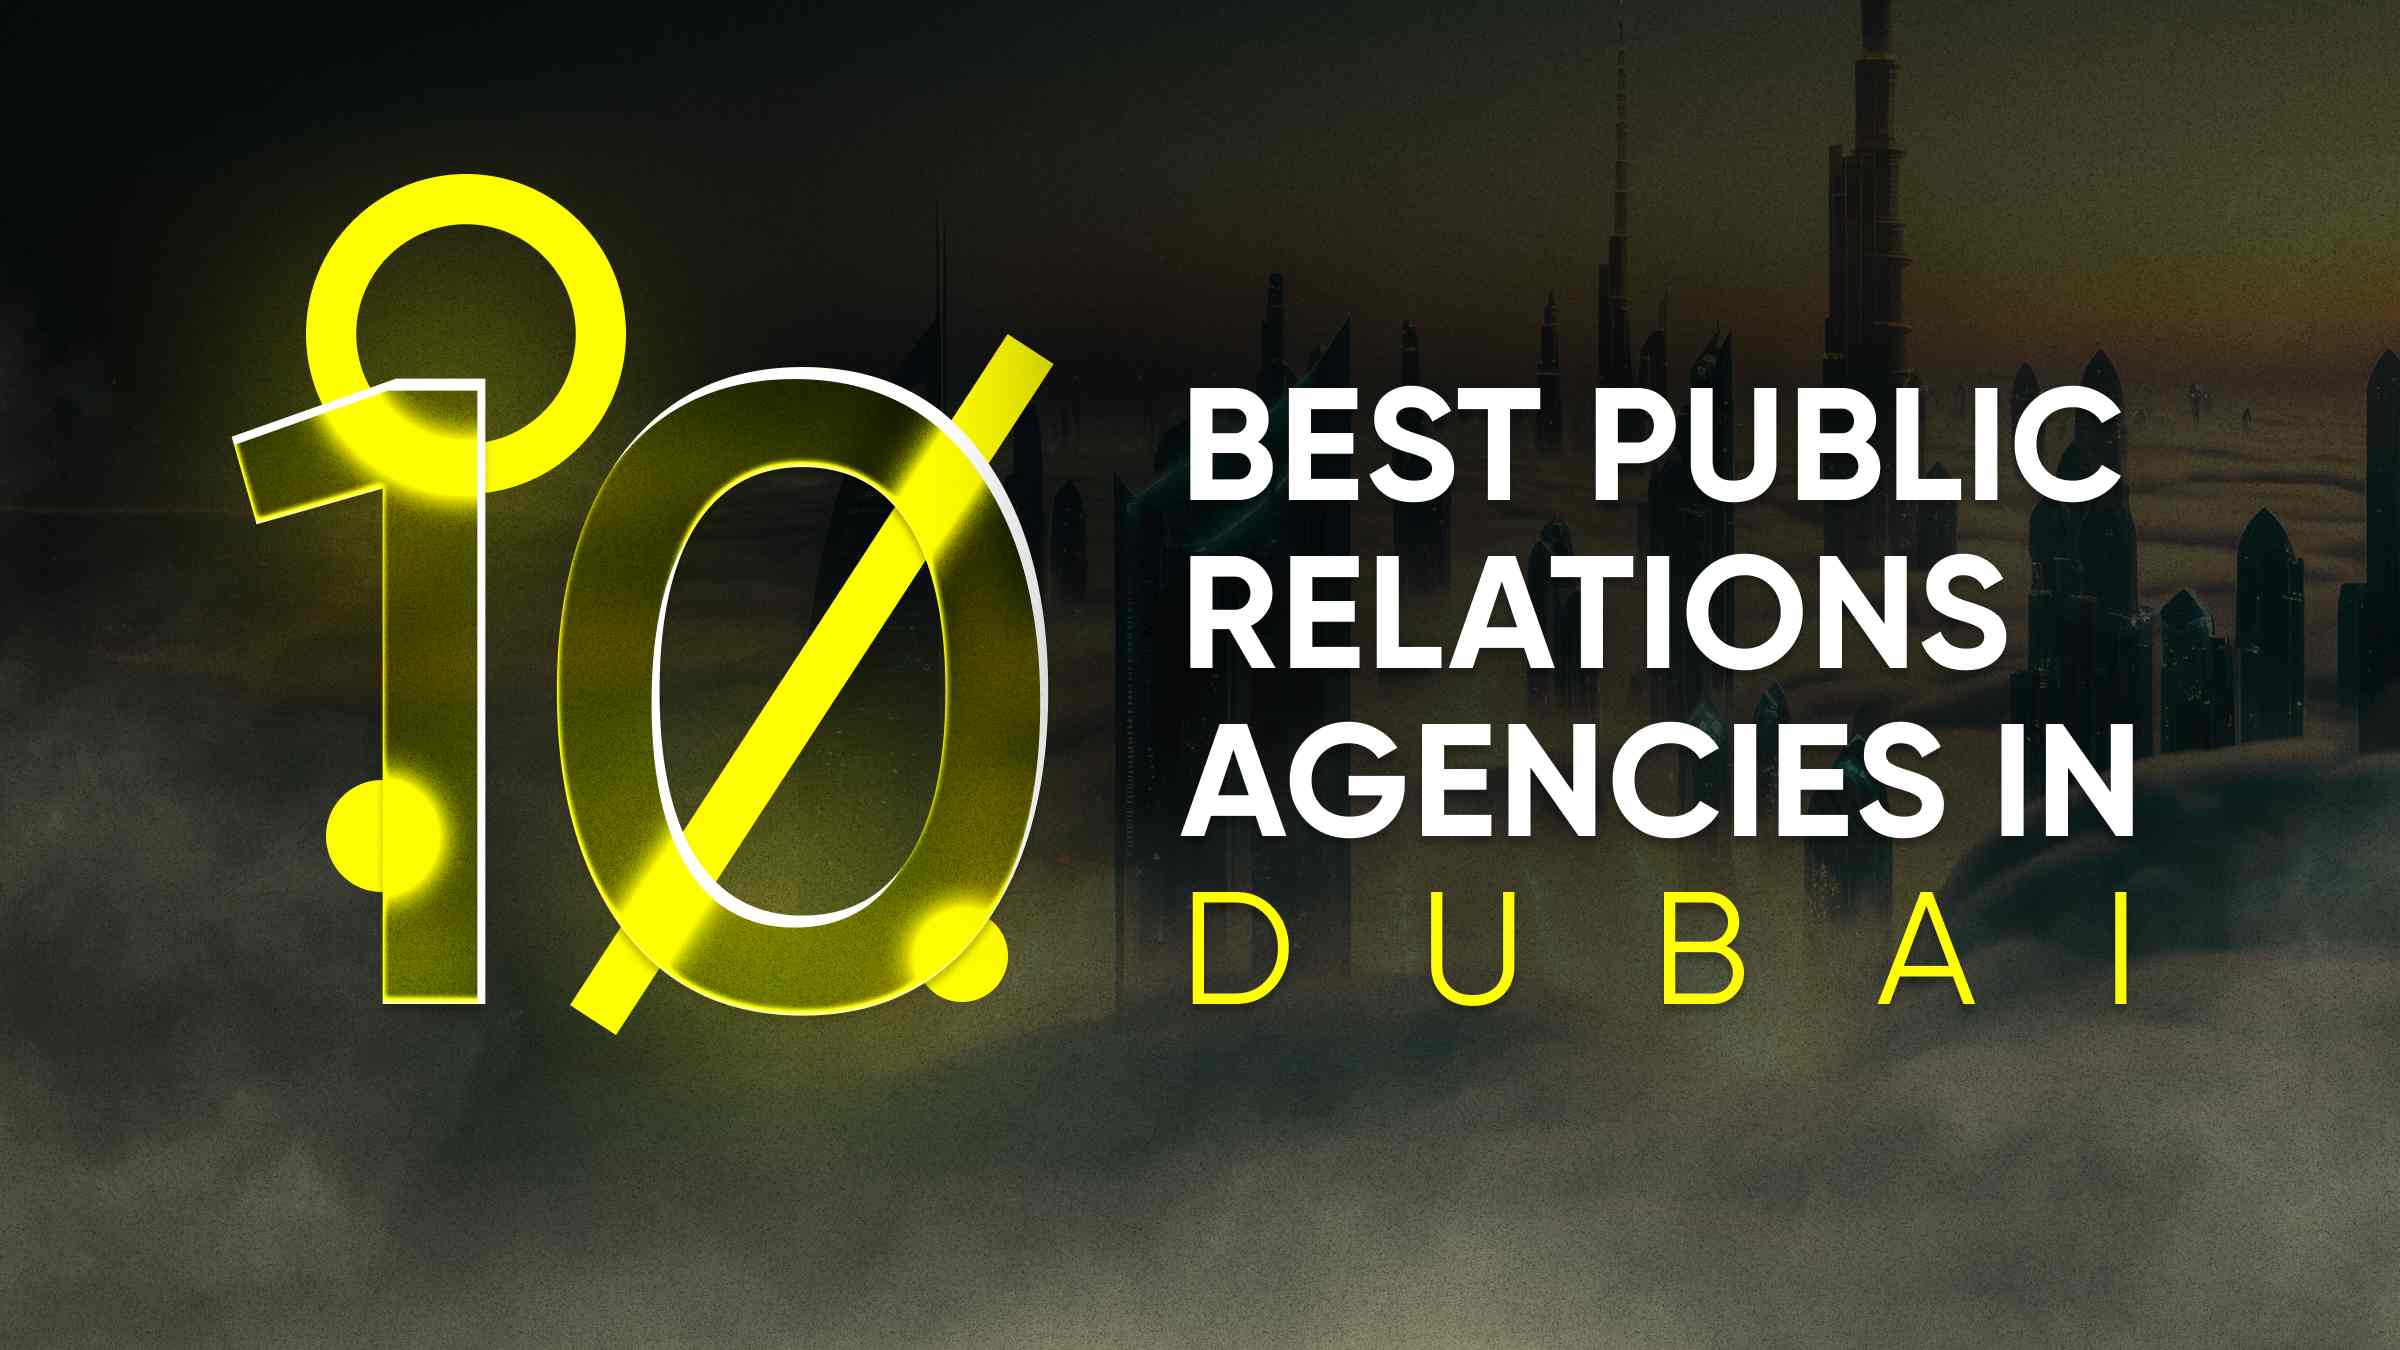 How XLI PR is one of the Best PR Agencies in London and Dubai?